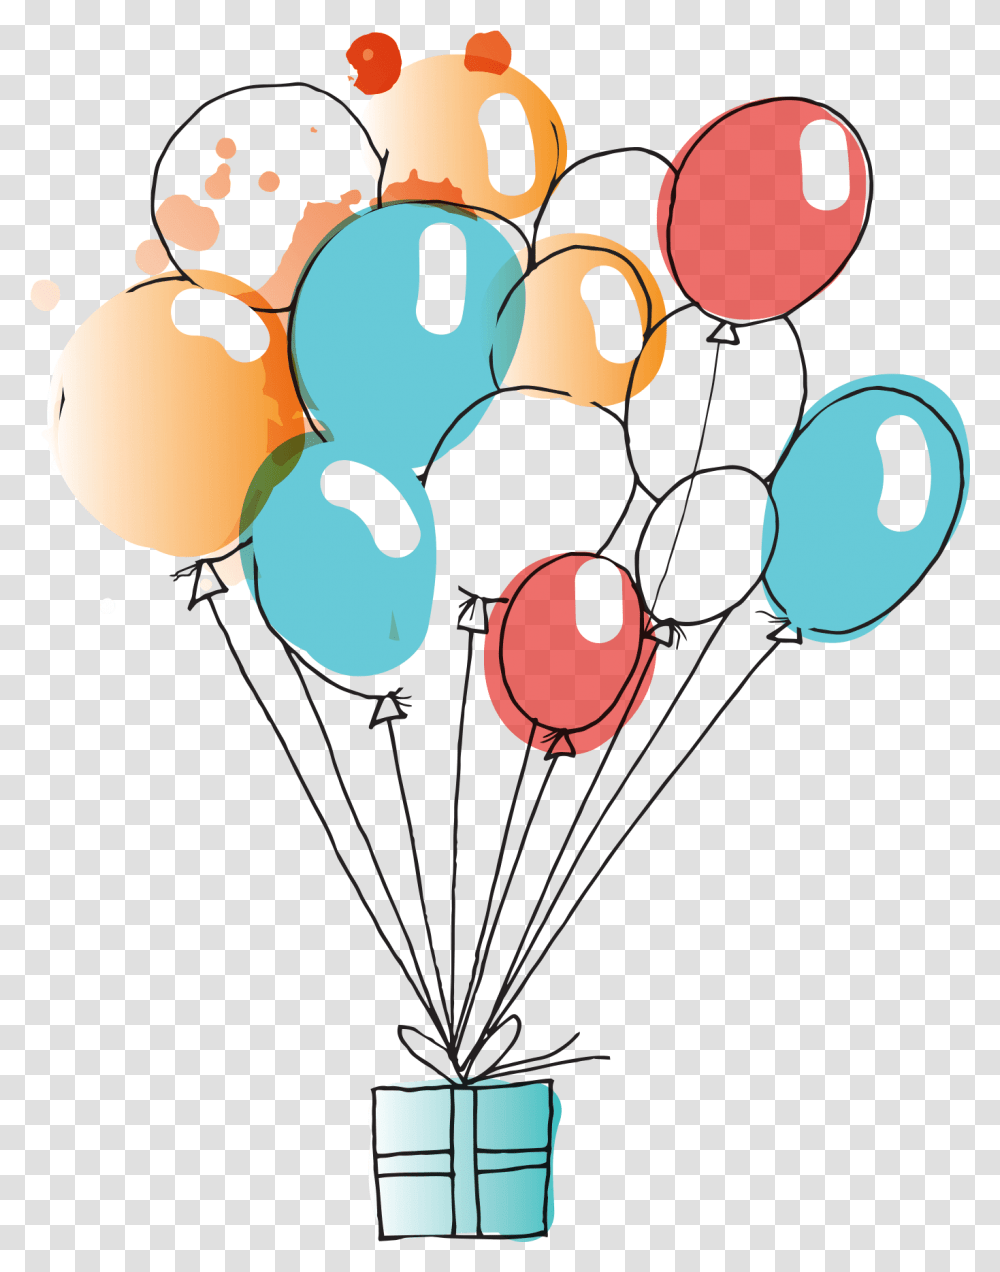 Balloons Watercolor Clipart Image Birthday Balloon Watercolor Transparent Png